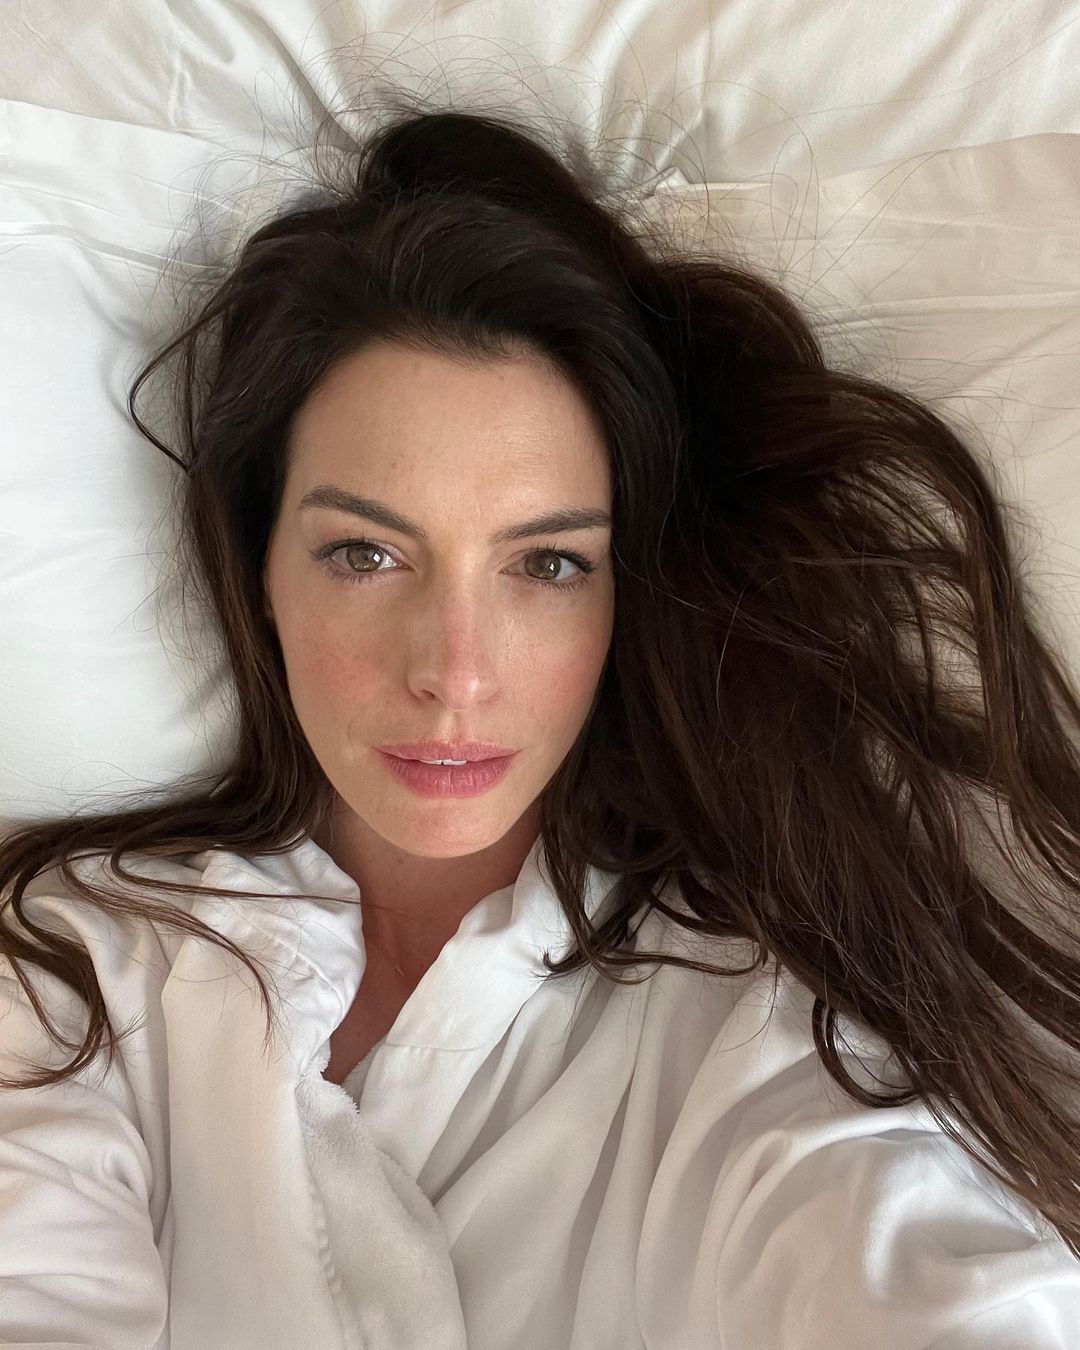 Anne Hathaway The Idea Of You selfie.